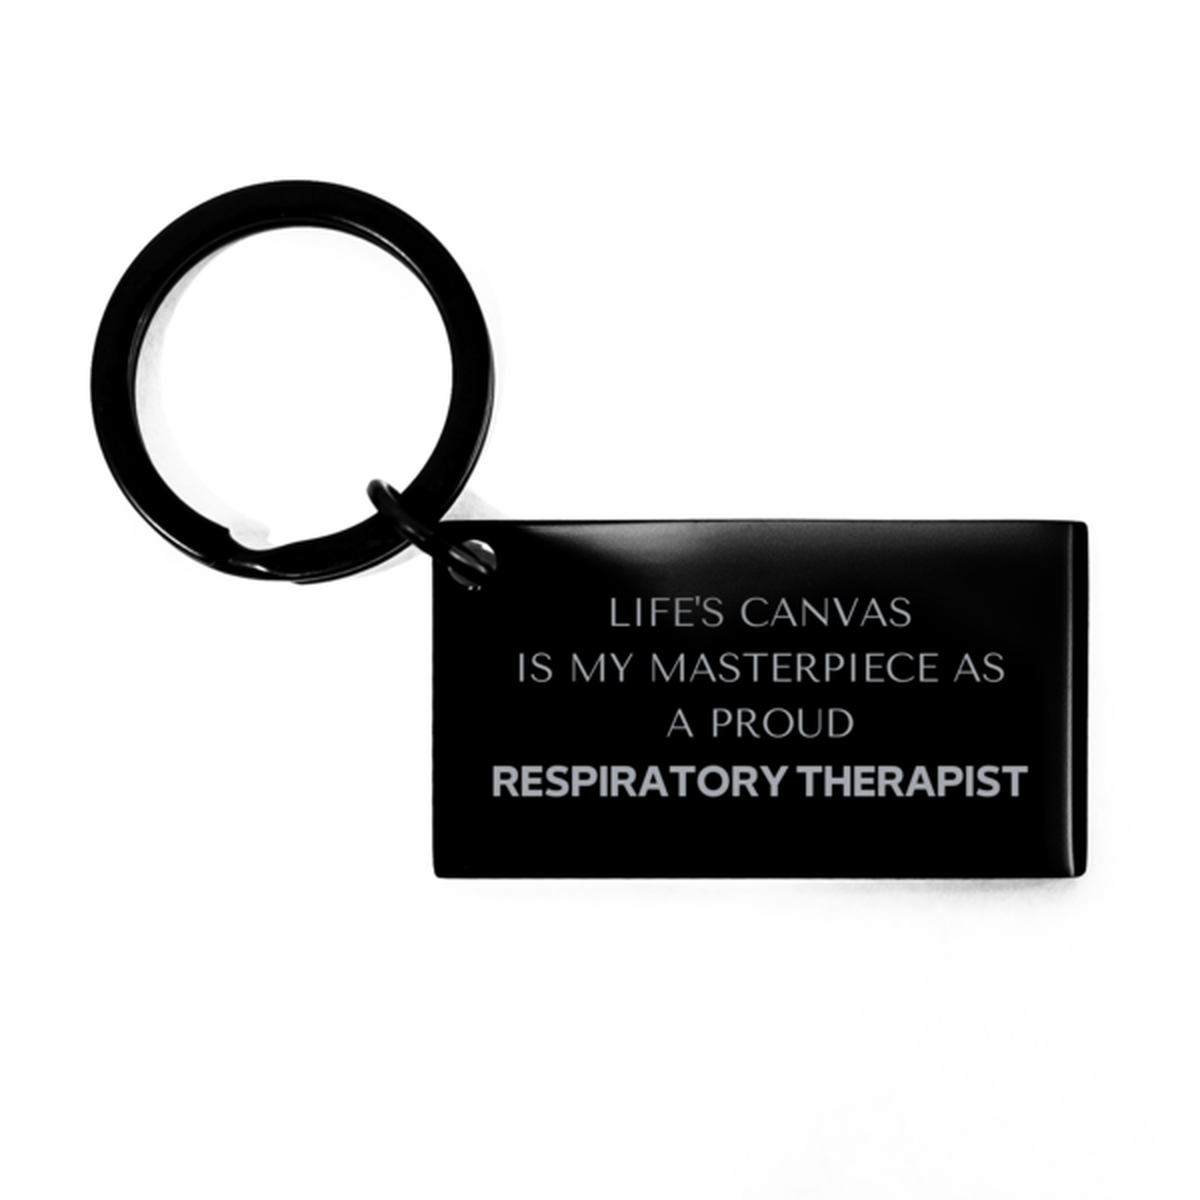 Proud Respiratory Therapist Gifts, Life's canvas is my masterpiece, Epic Birthday Christmas Unique Keychain For Respiratory Therapist, Coworkers, Men, Women, Friends